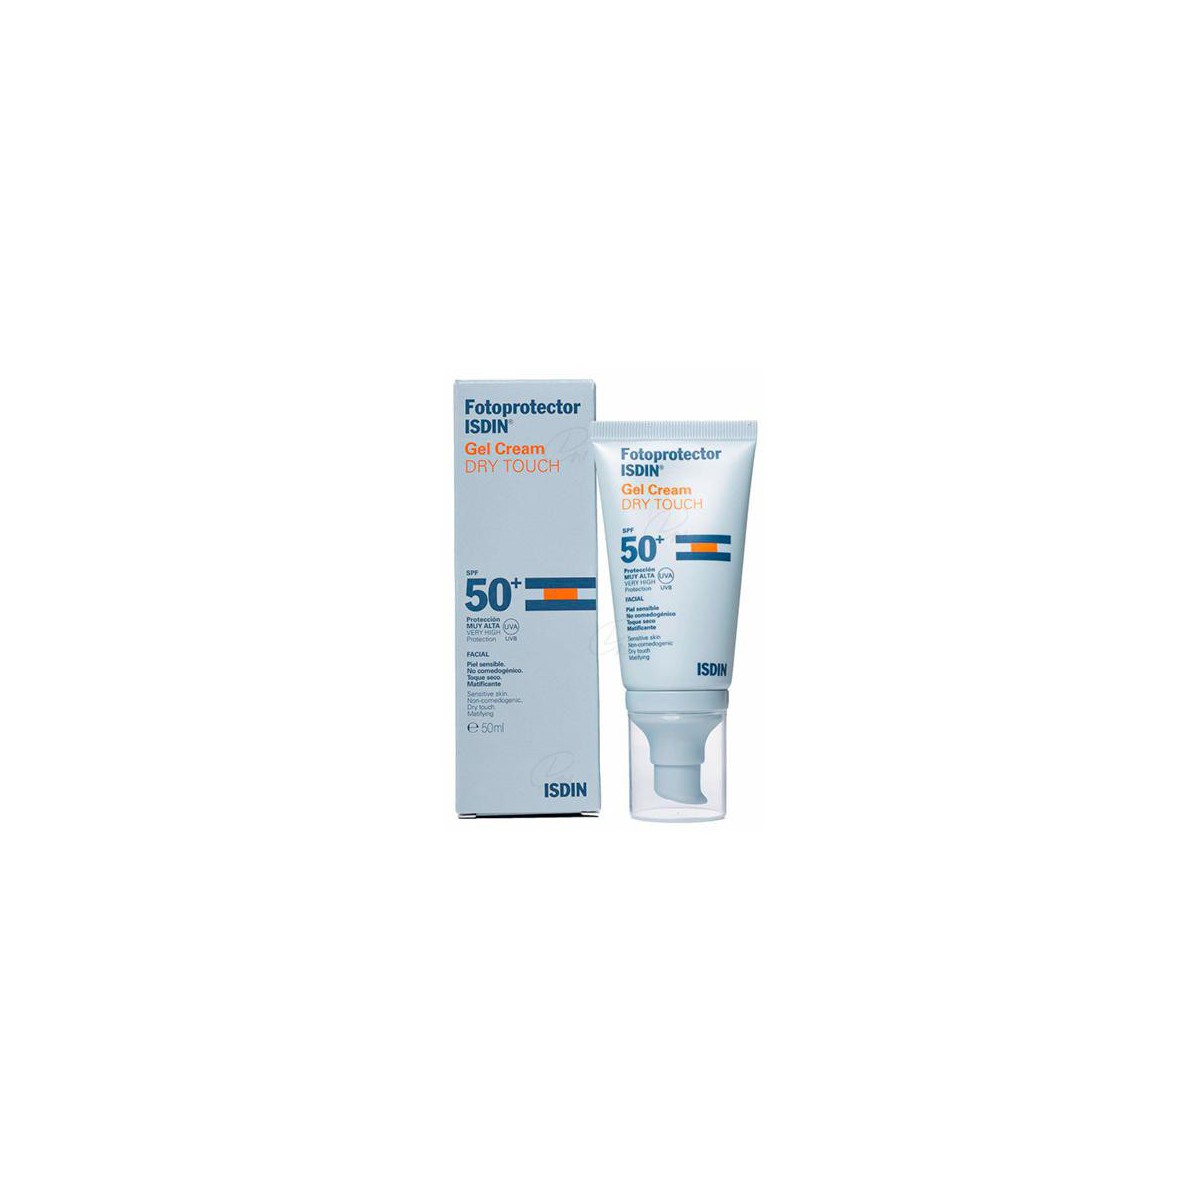 ISDIN FOTOPROTECTOR SPF50+ GEL-CREMA DRY TOUCH 50 ML